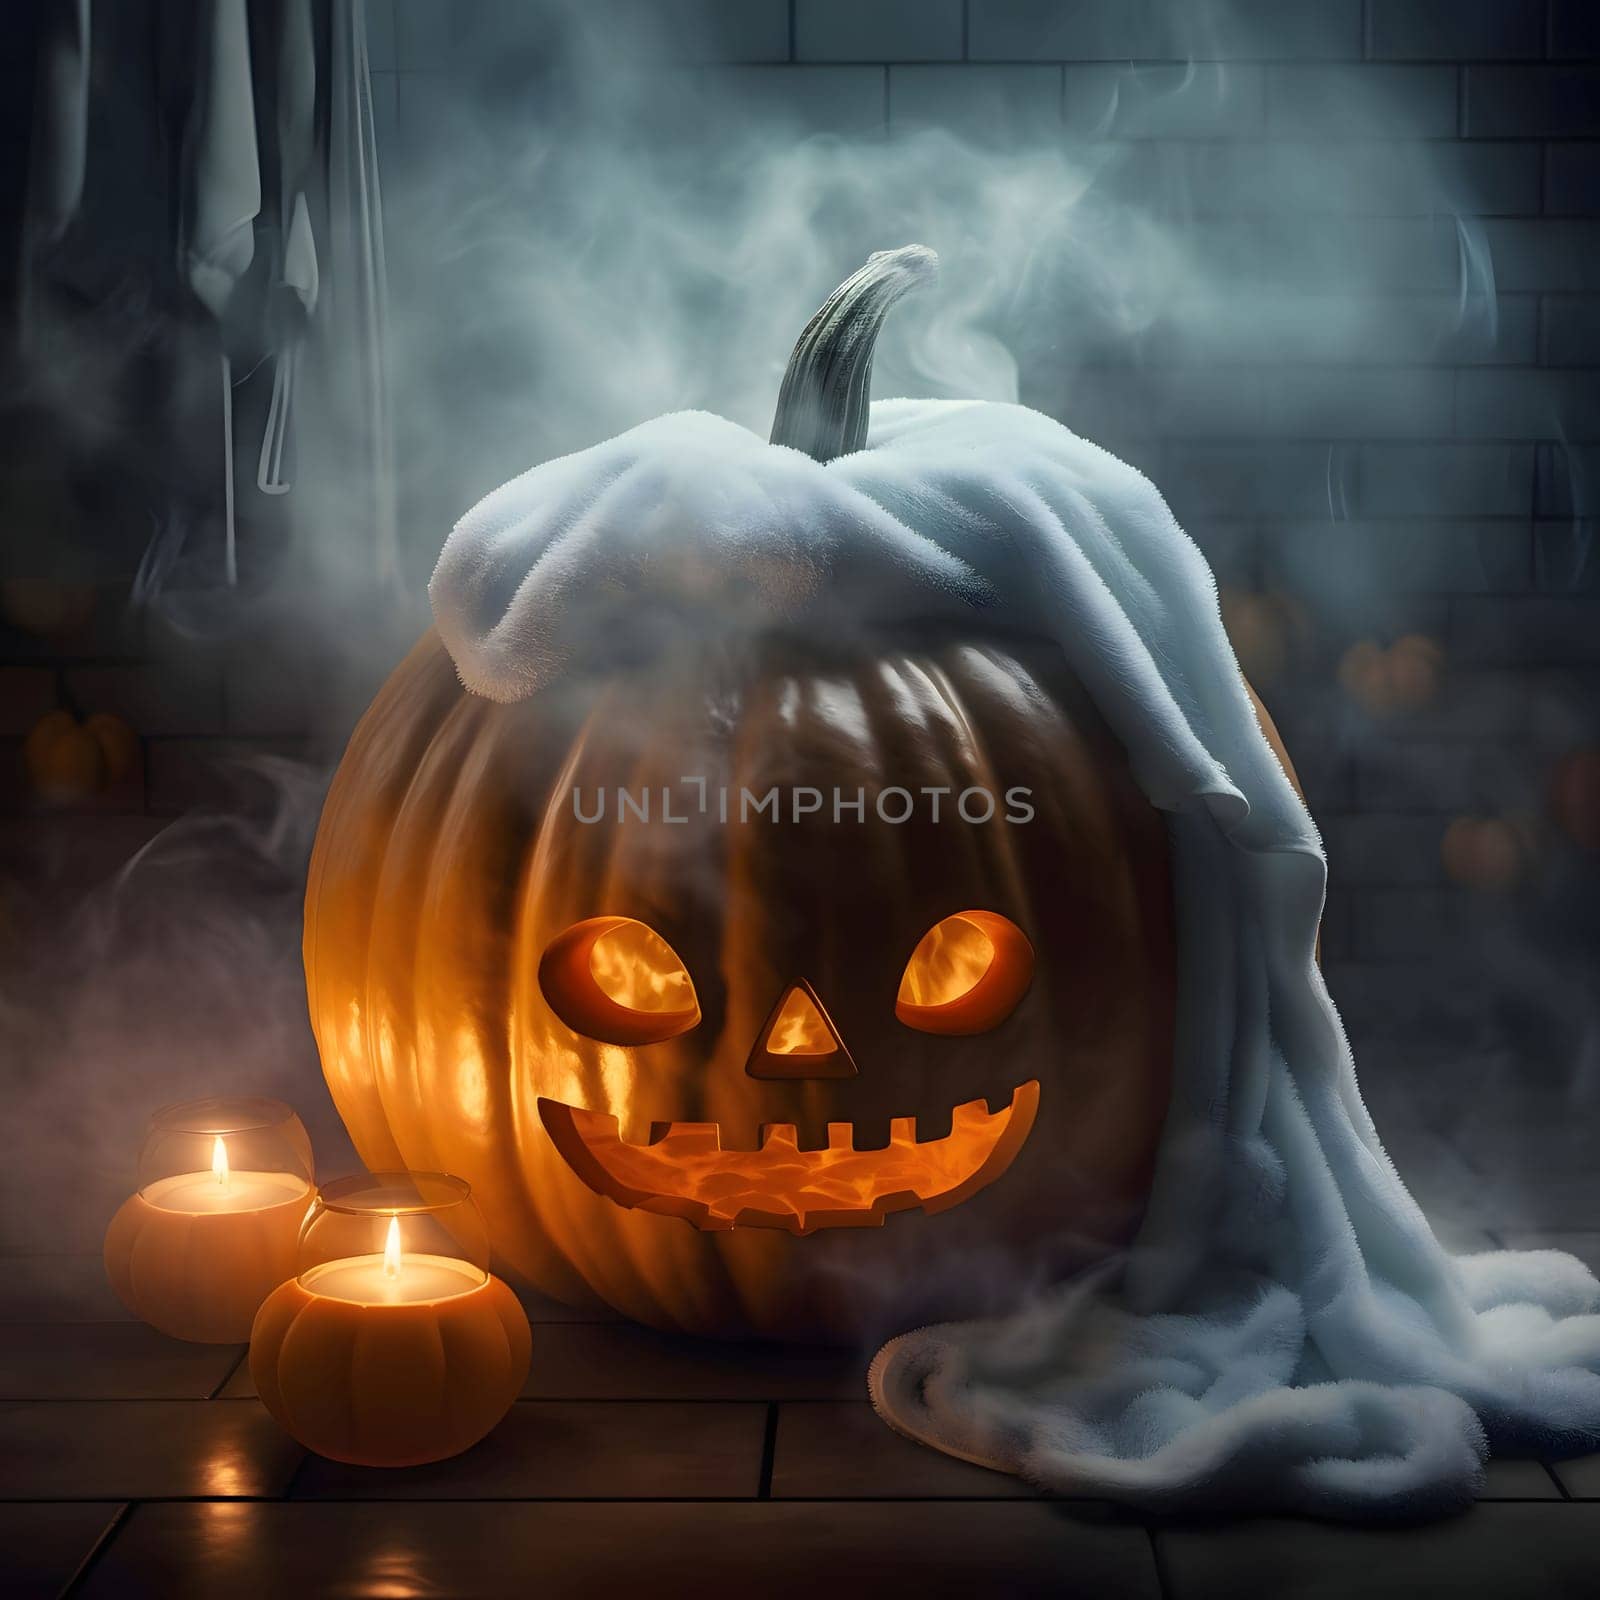 Dark pumpkin with towel smoke all around, glowing pumpkin candles, a Halloween image. by ThemesS